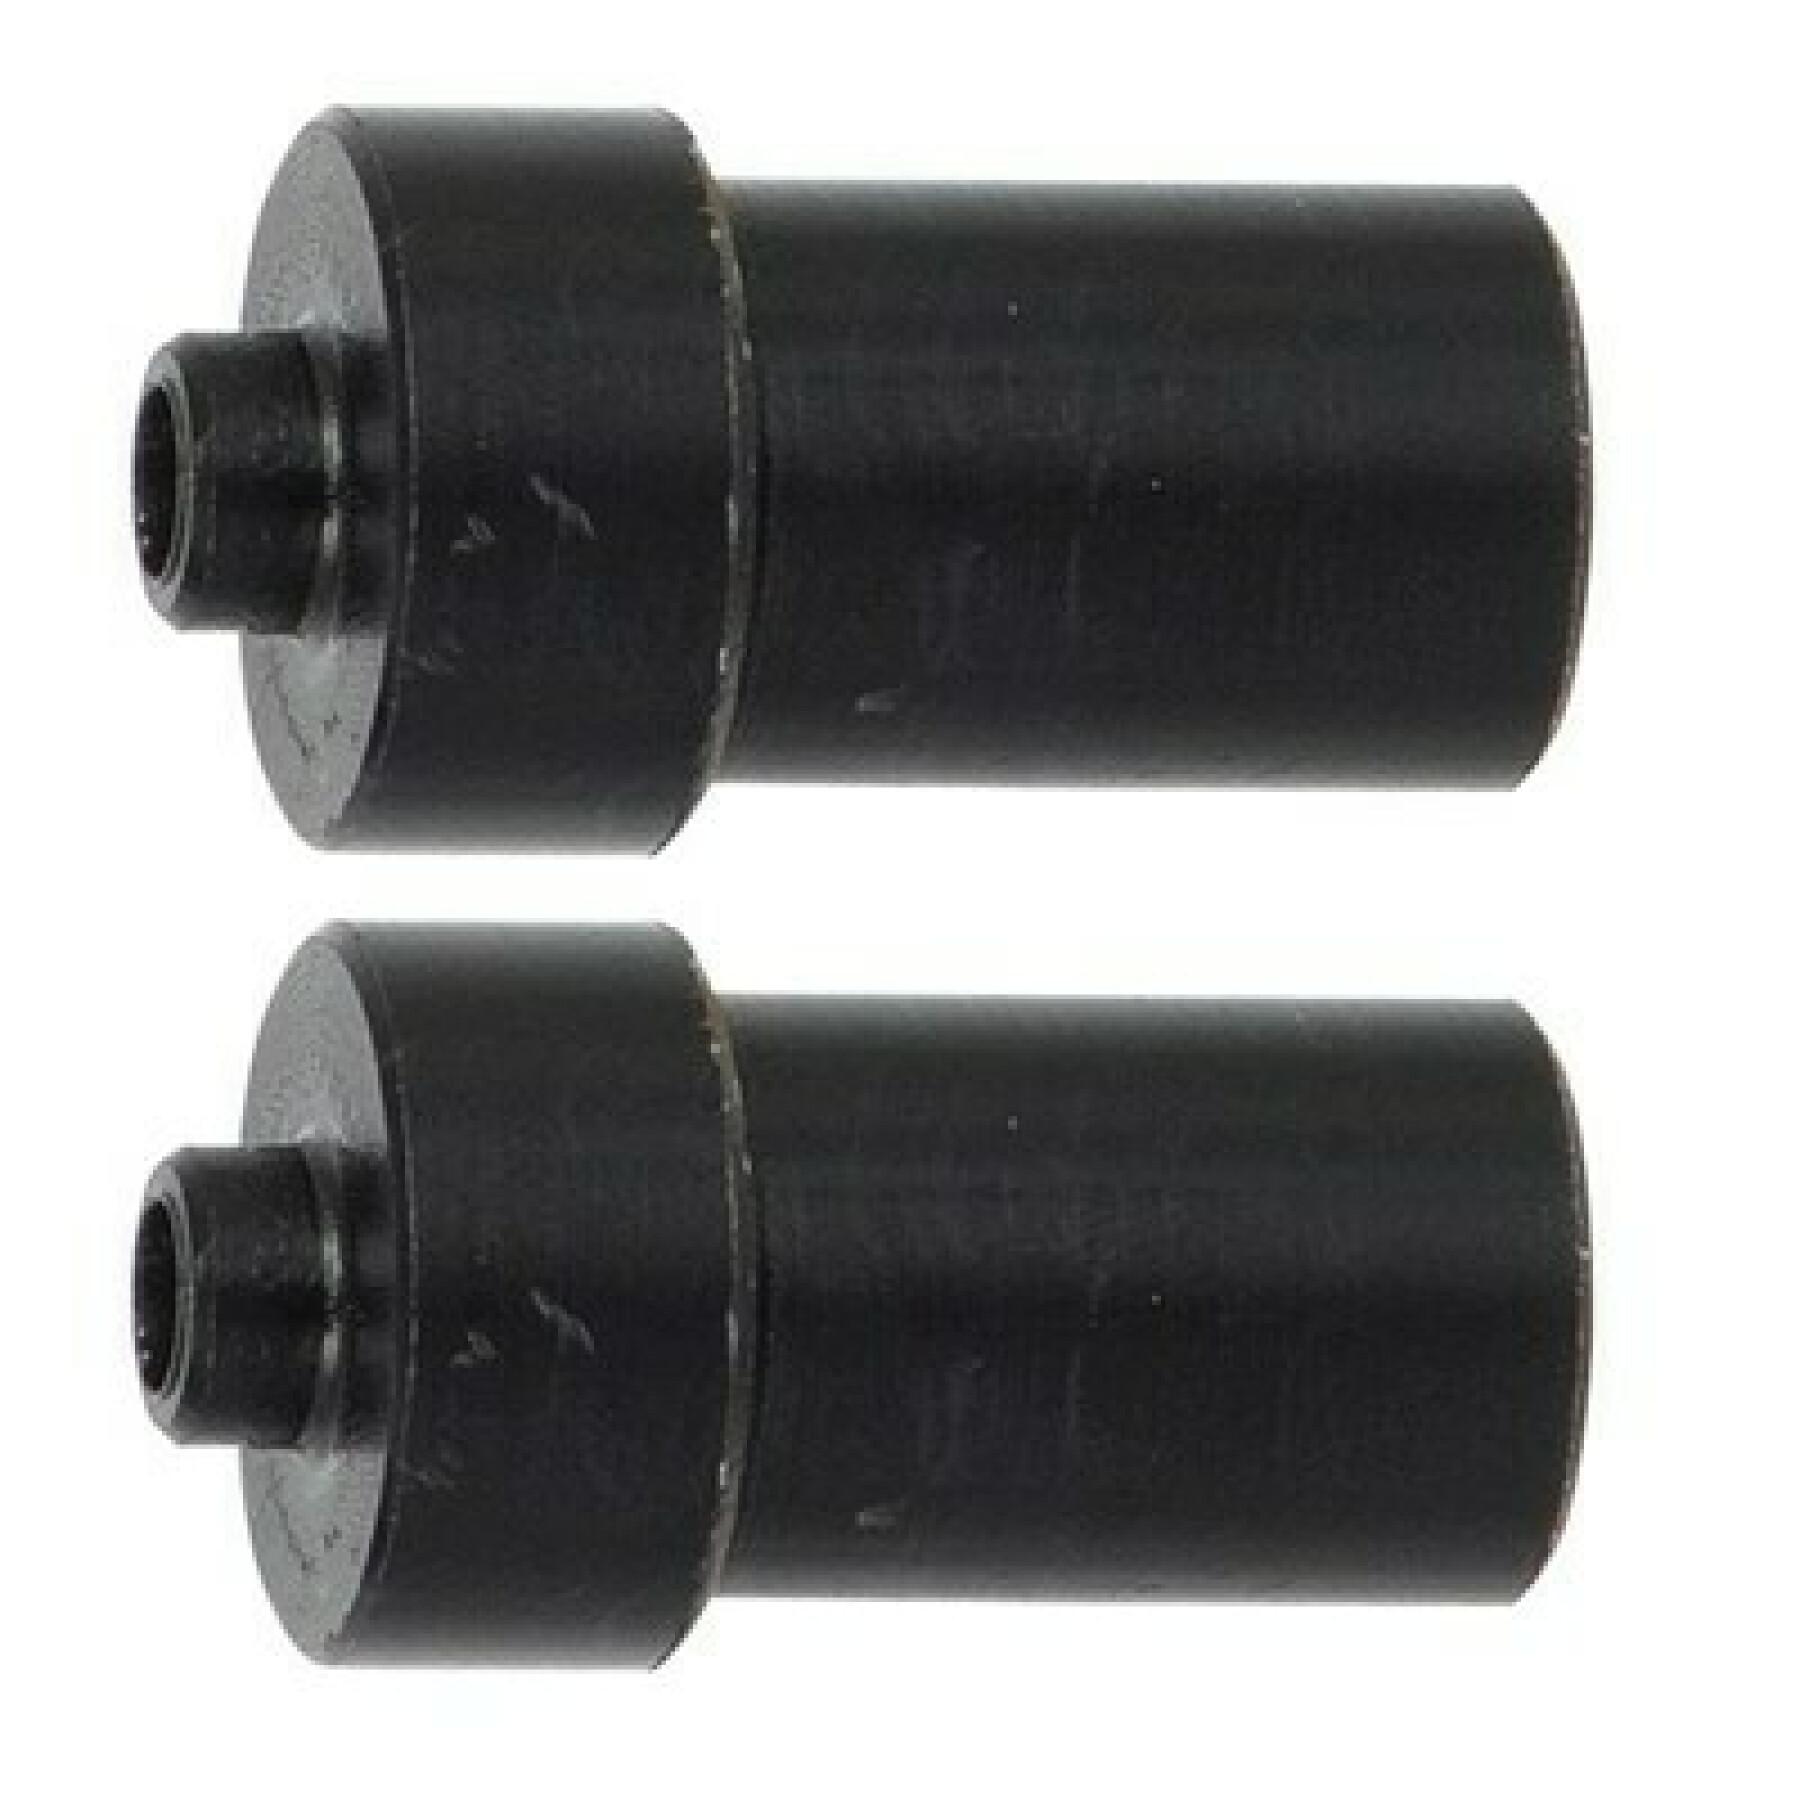 Adapter for axis Unior 15mm